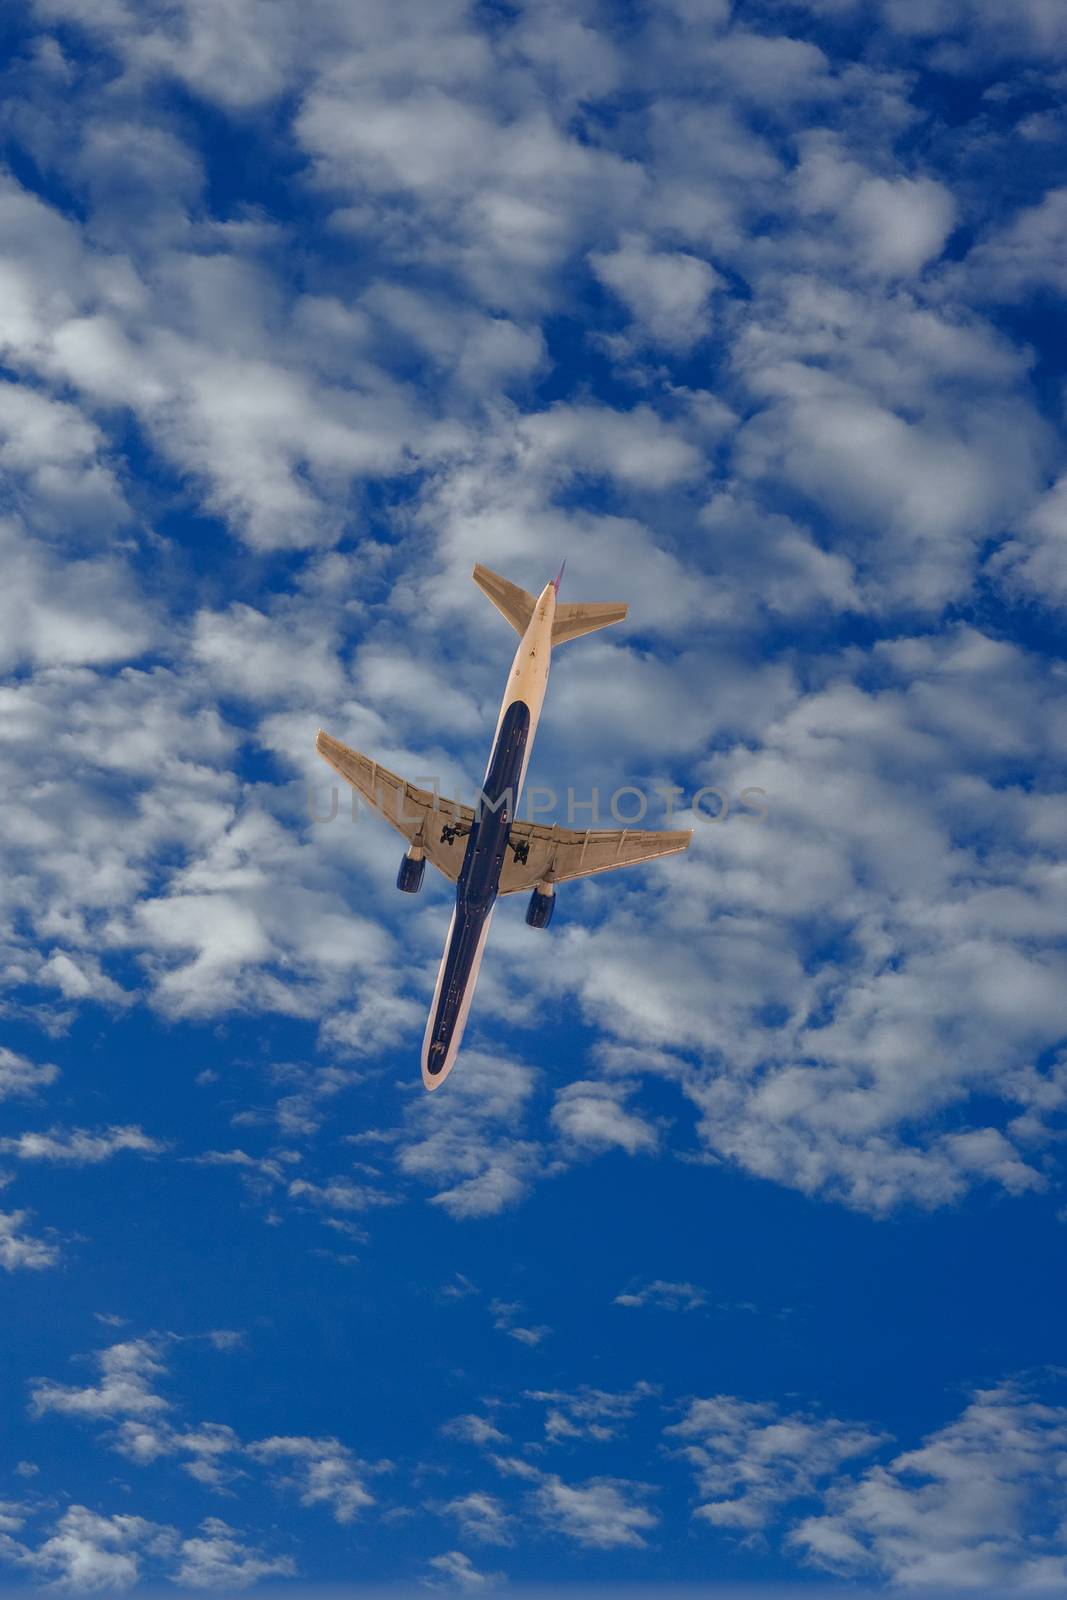 Commercial Airliner Overhead in Nice Sky by dbvirago